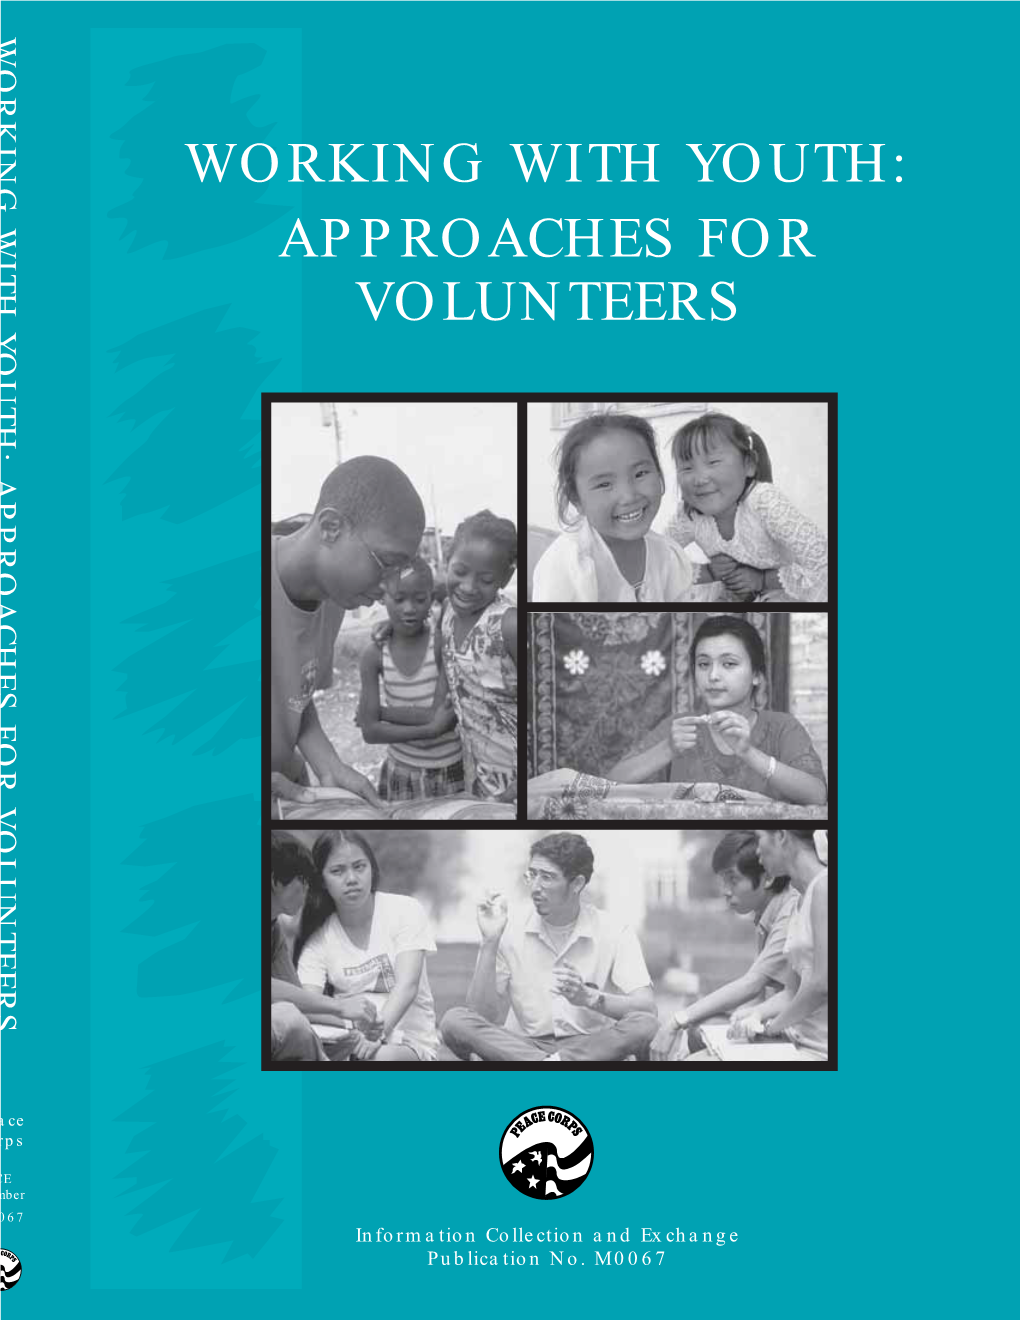 Working with Youth: Approaches for Volunteers